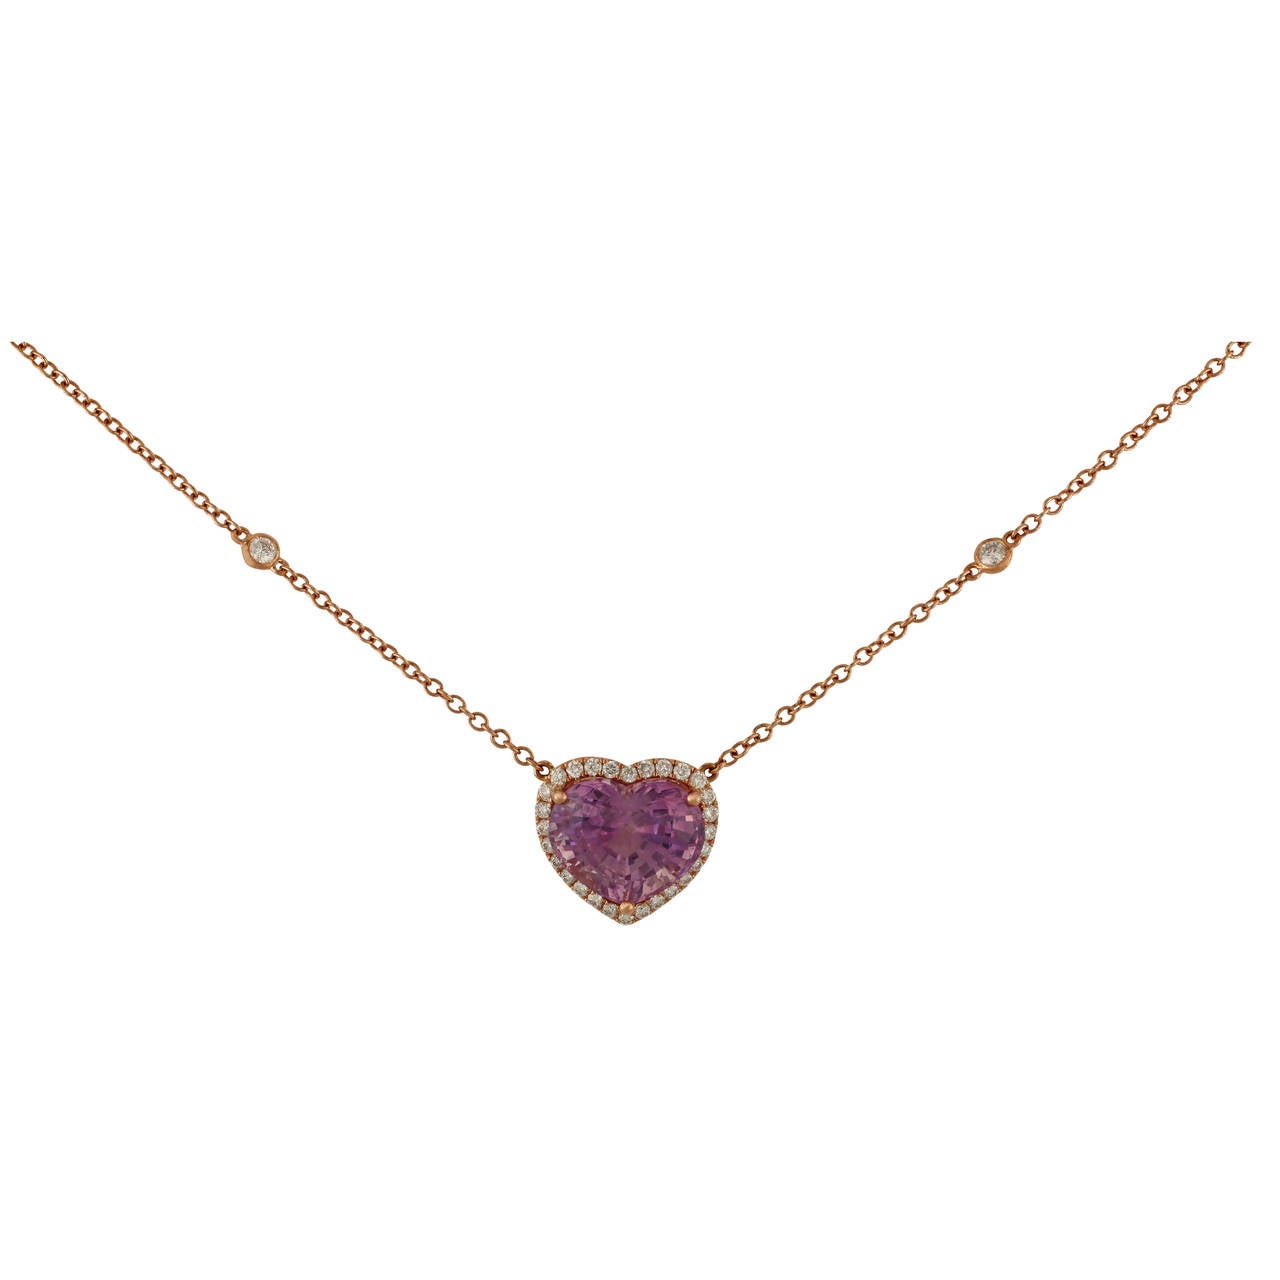 18kt Rose gold necklace set with 7.95ct heart shaped Pink Sapphire and white diamonds.